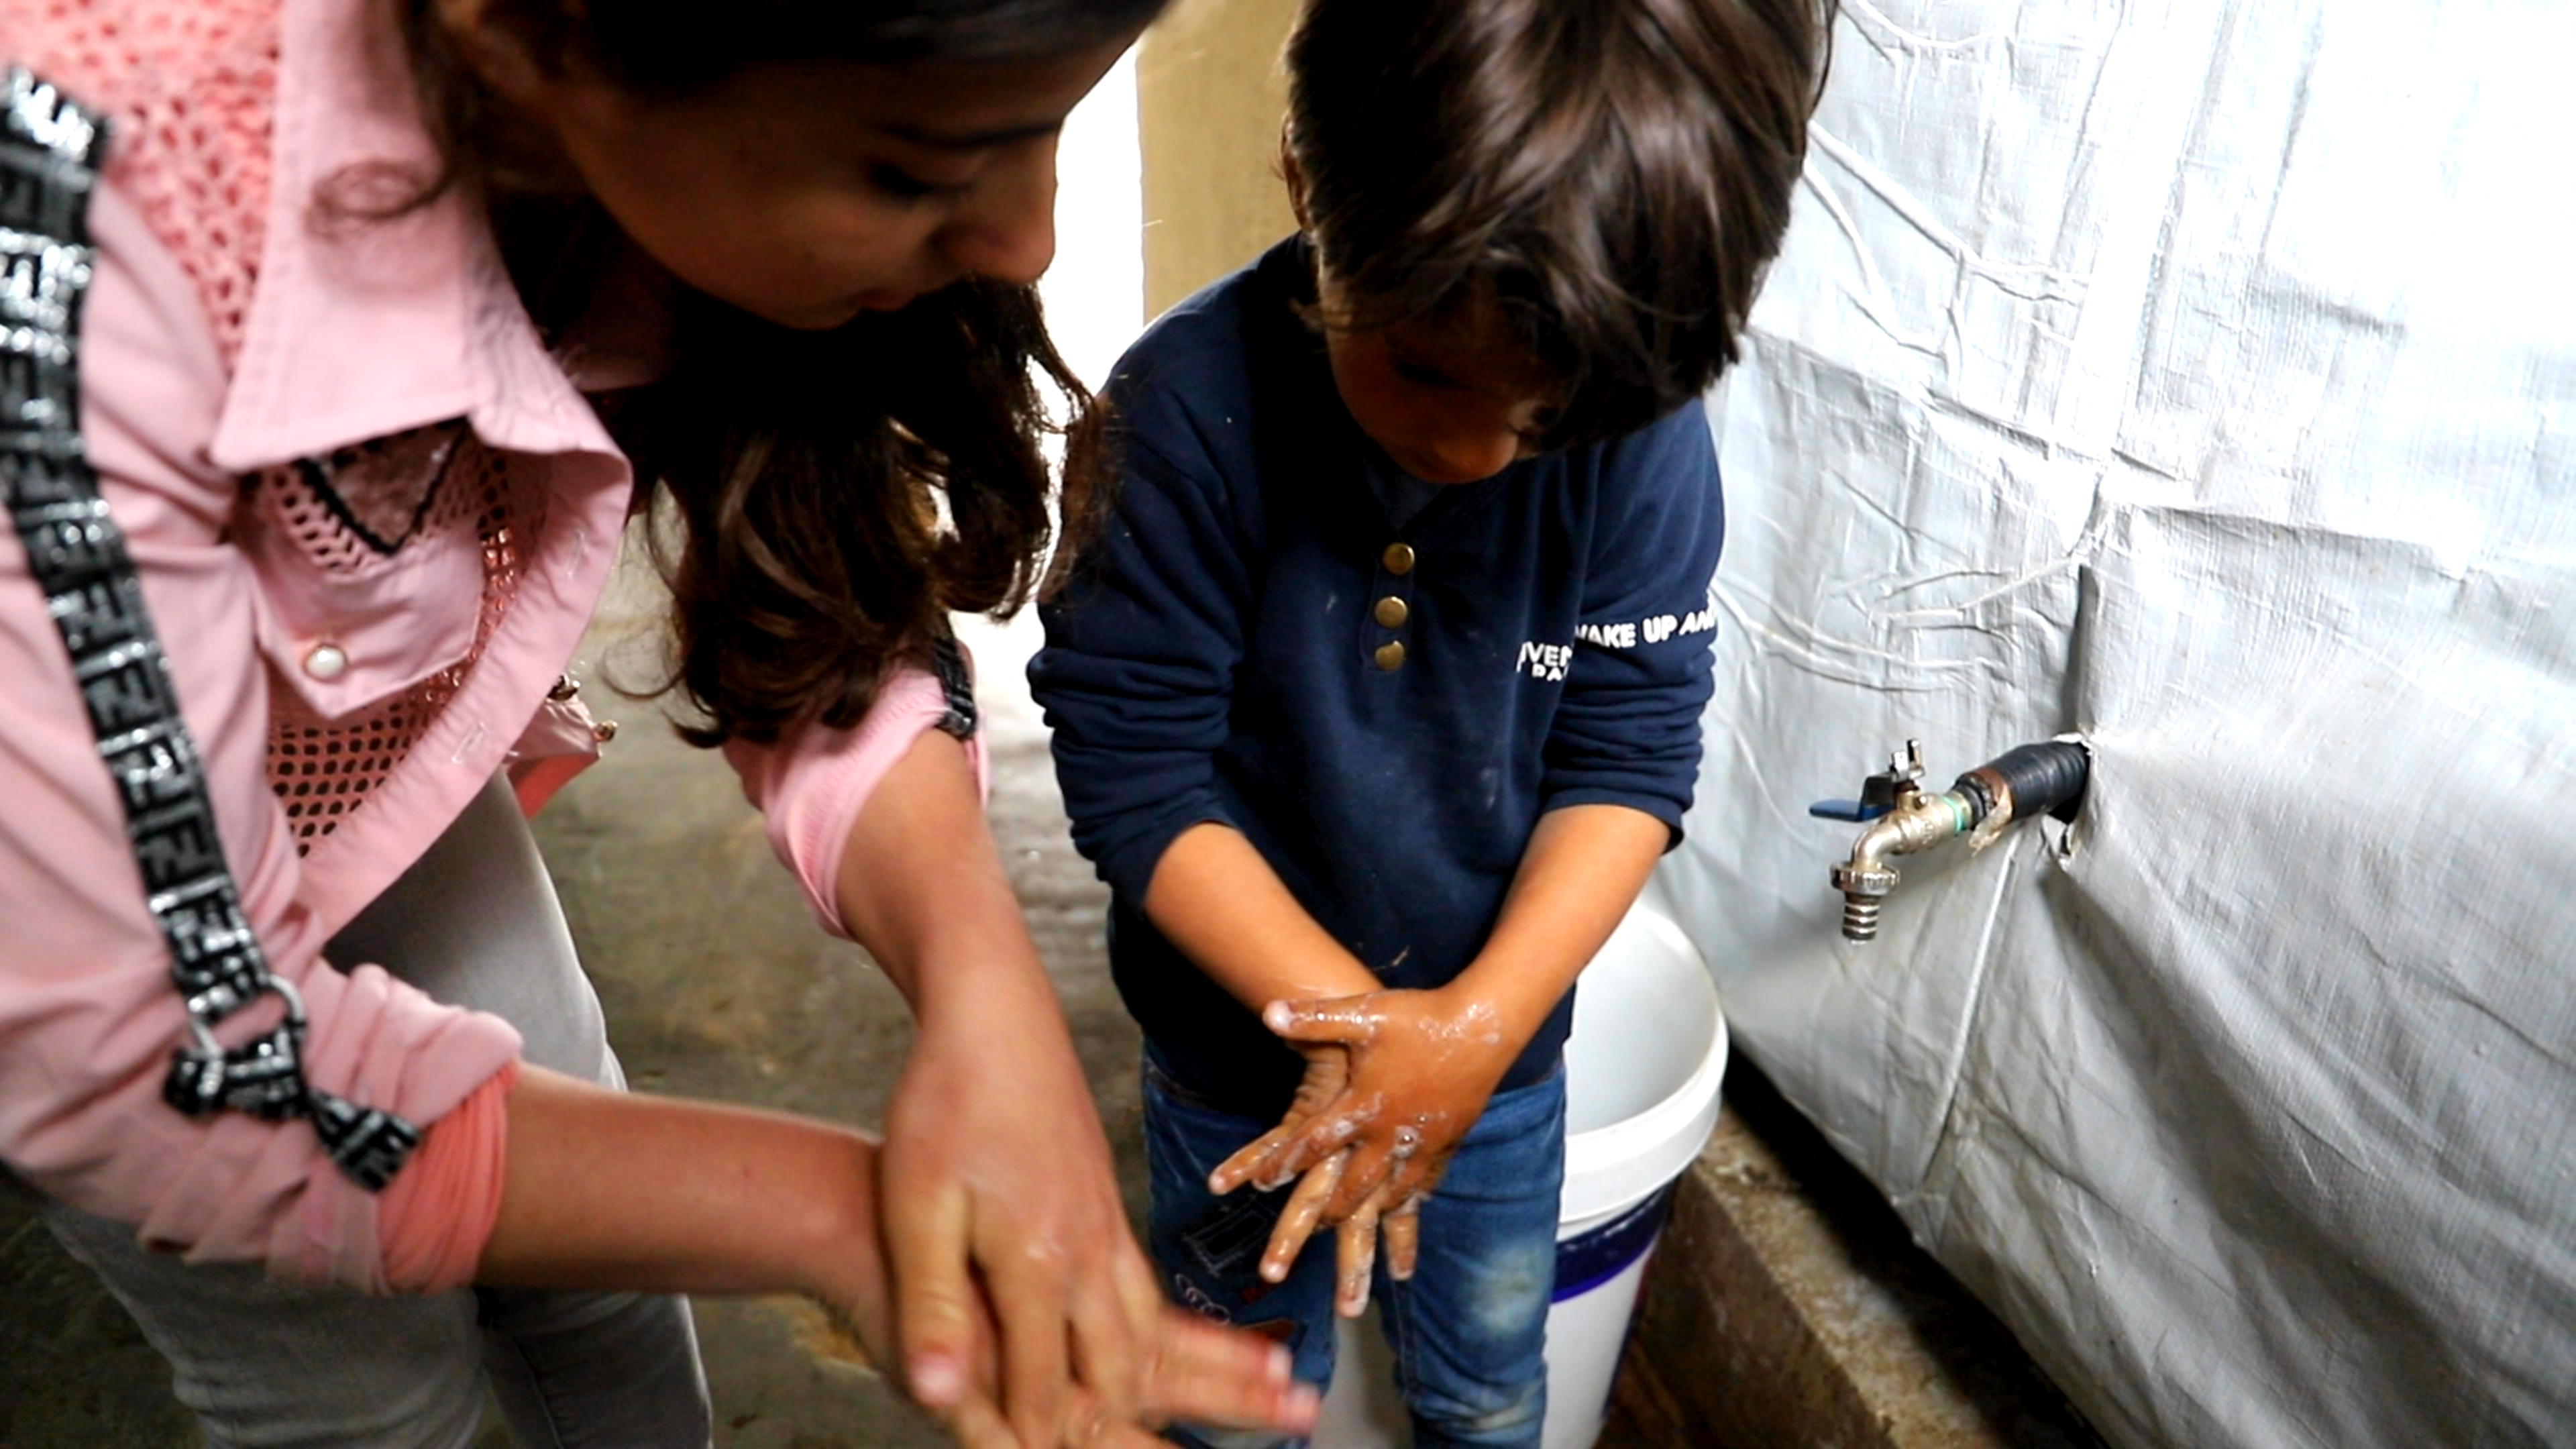 Yasmine teaching her brother how to wash his hands